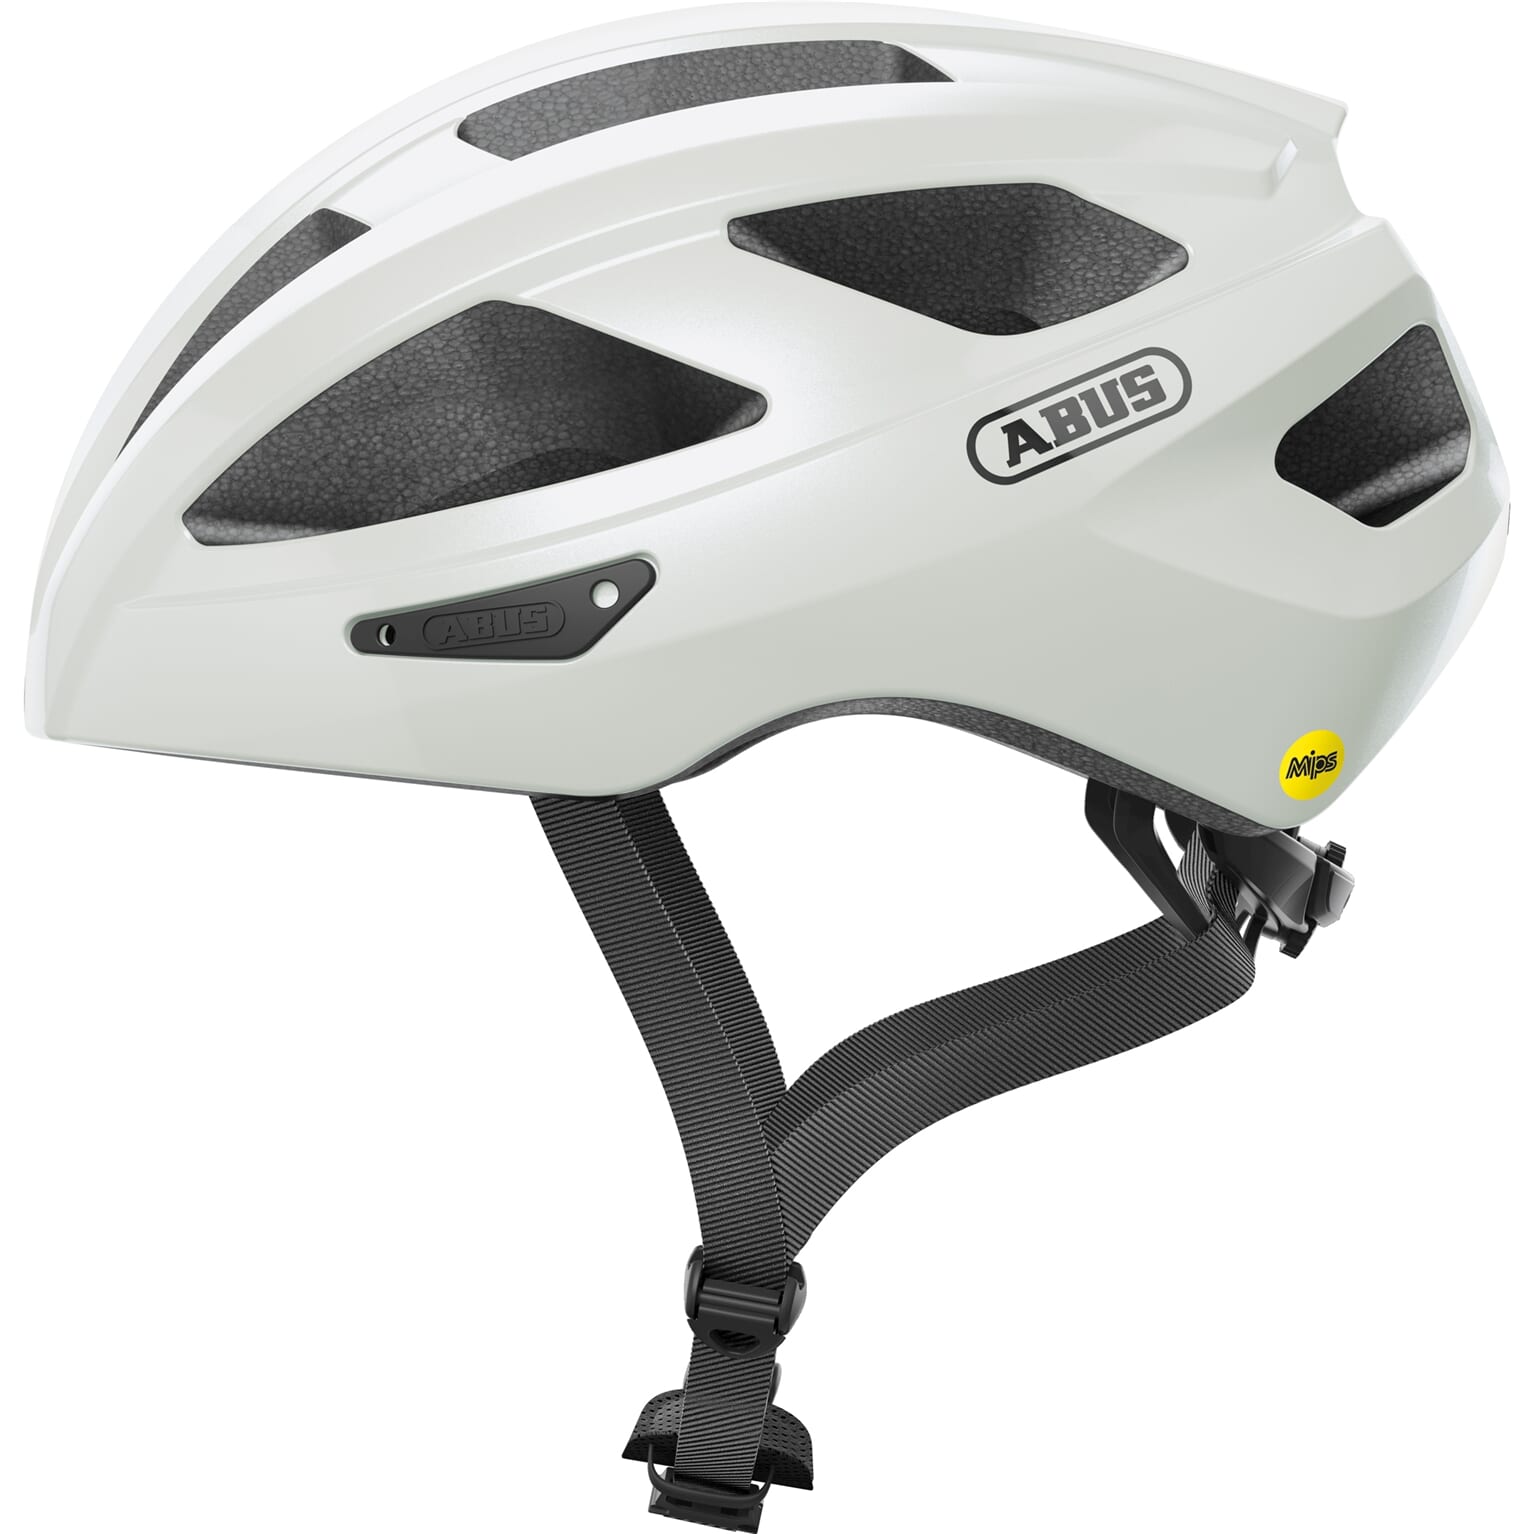 Abus helm Macator MIPS pearl white S 51-55cm